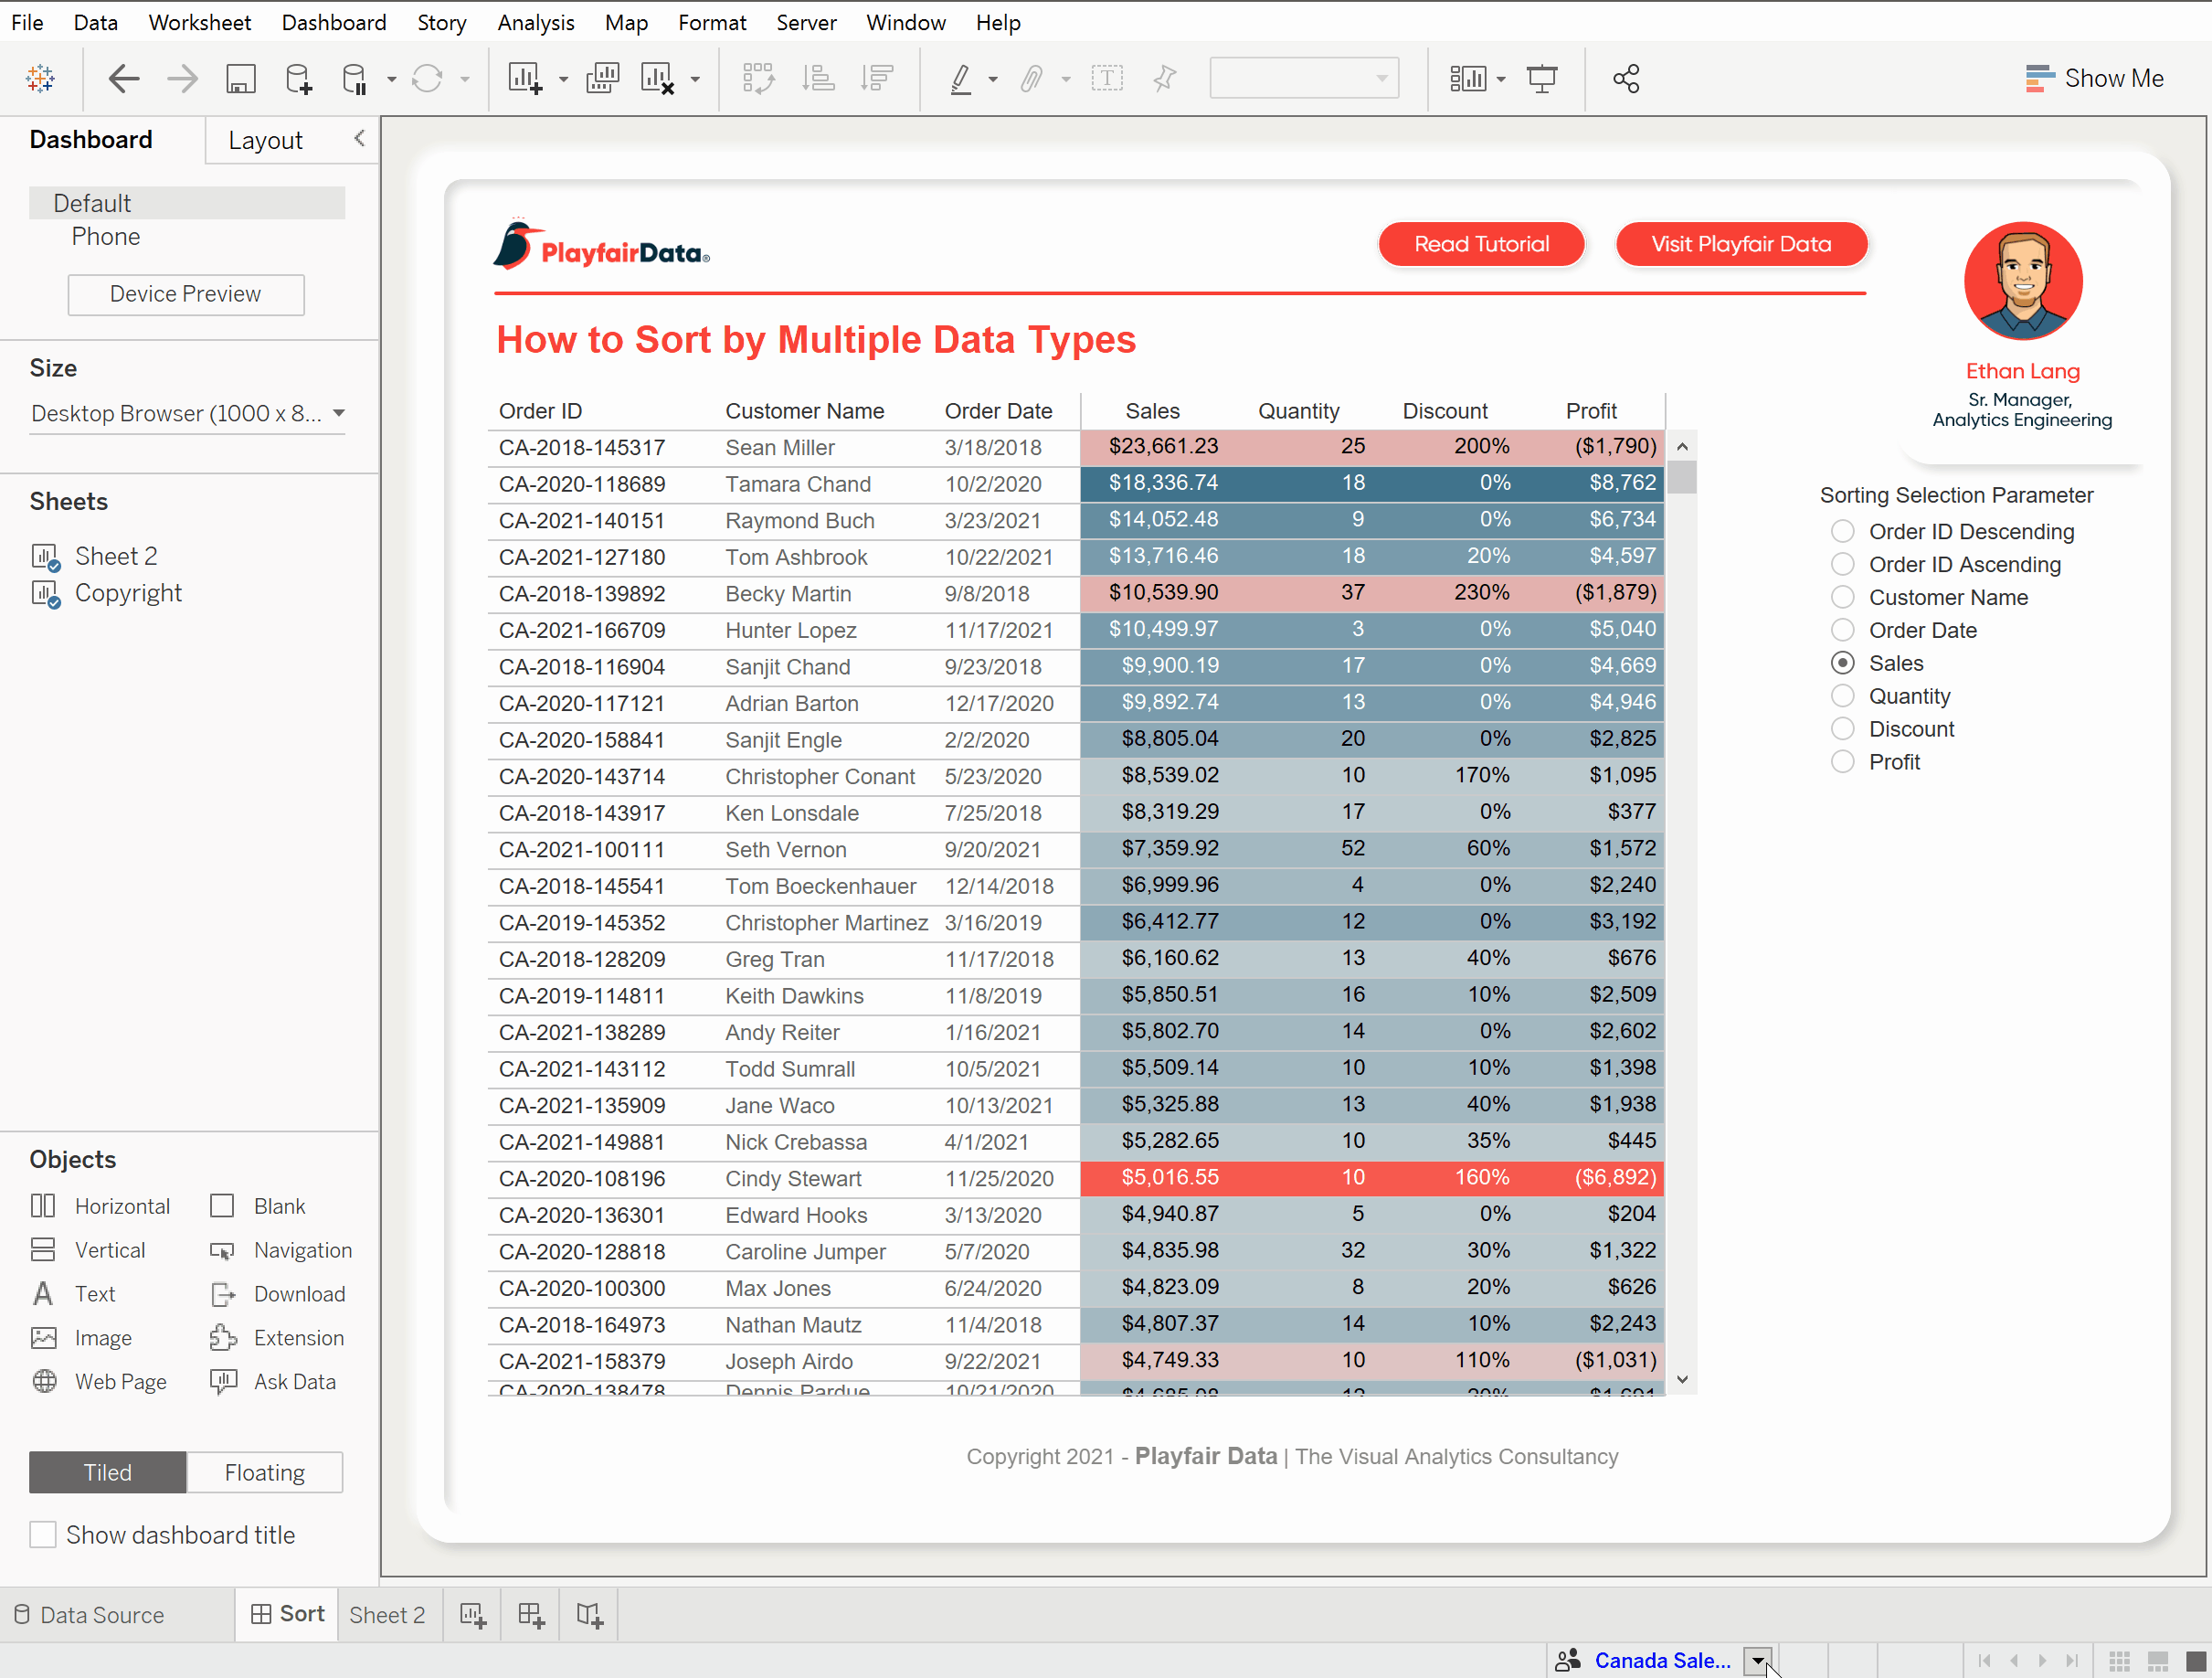 How to Implement Row-Level Security in Tableau